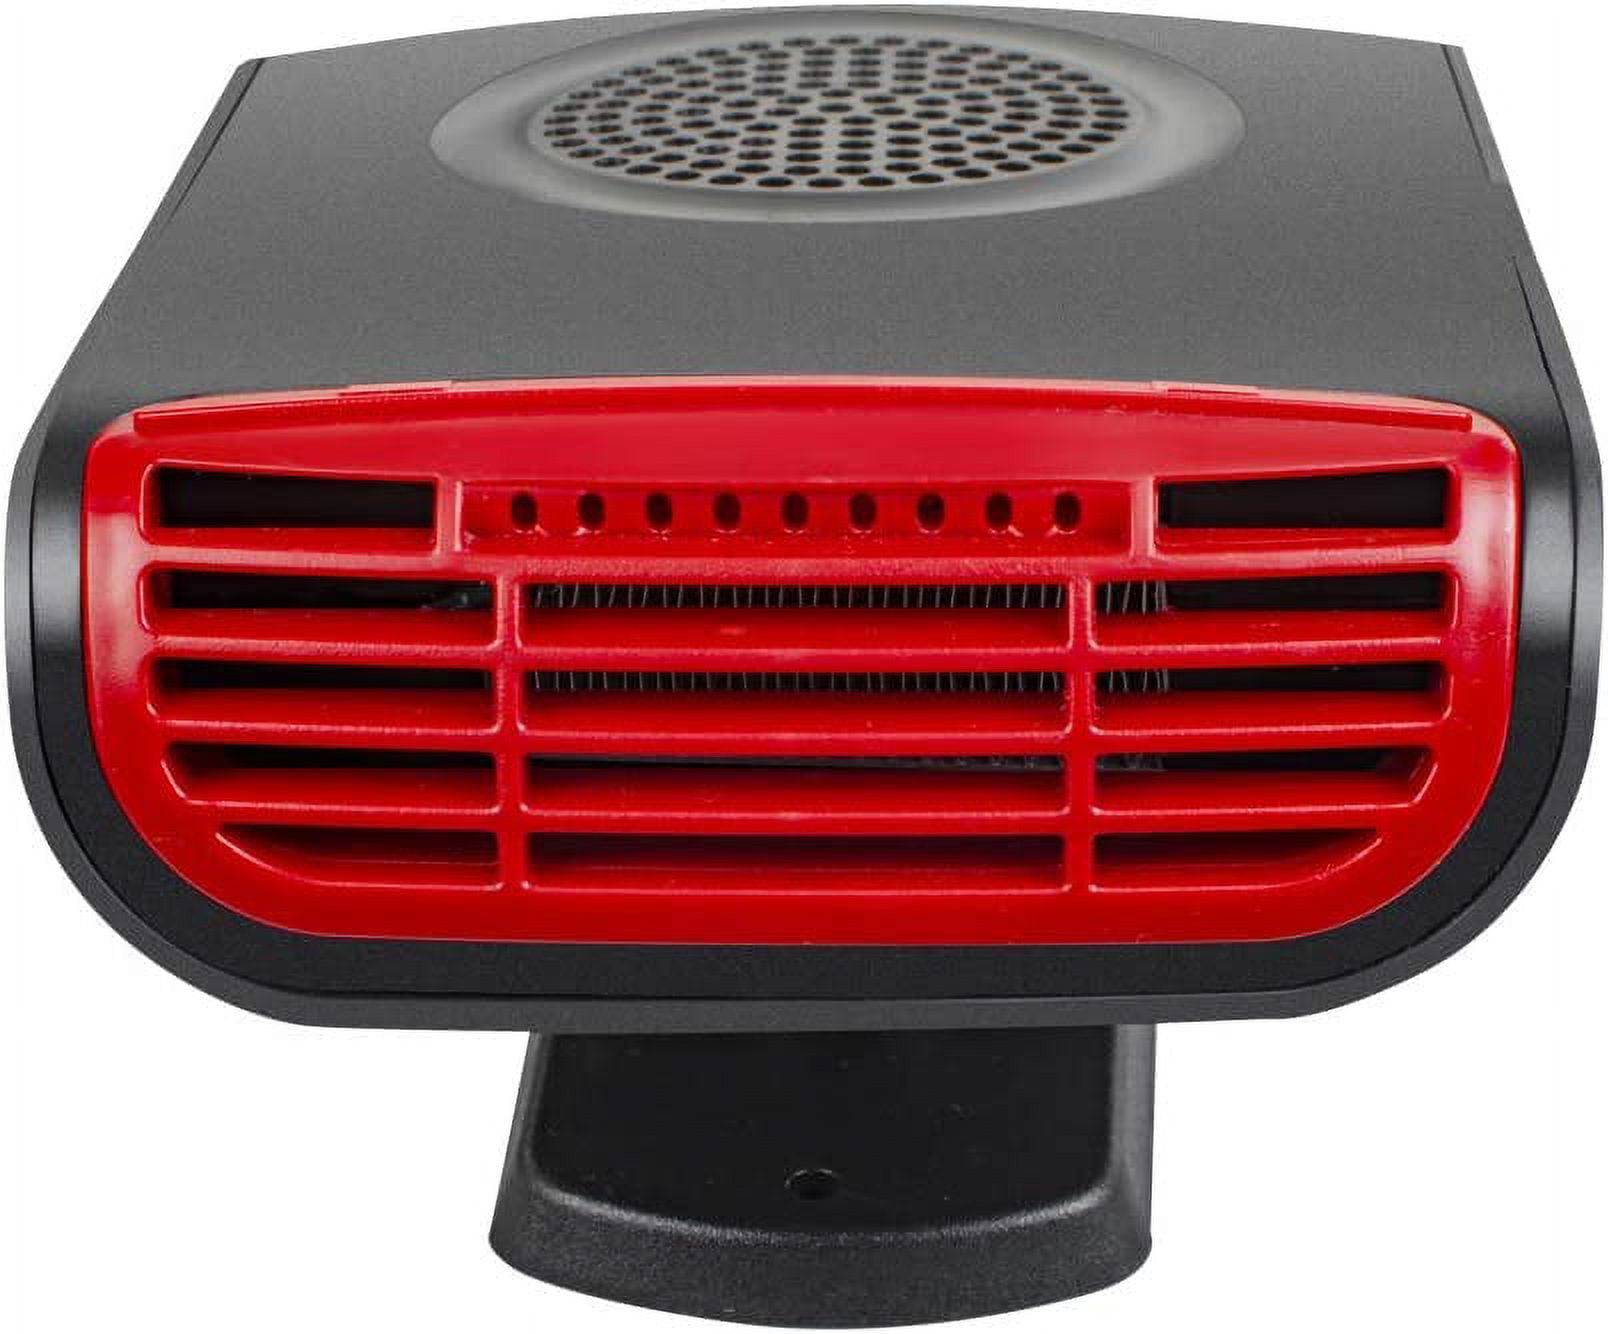 Car Heater 12V 150W Portable Car Heaters 3 in 1 Heating & Cooling& Air  Purify Electric Fan Heater for Fast Heating Defroster Defogger Demister,  Auto Dryer Windscreen Fan (3-in-1 12V 150W) 